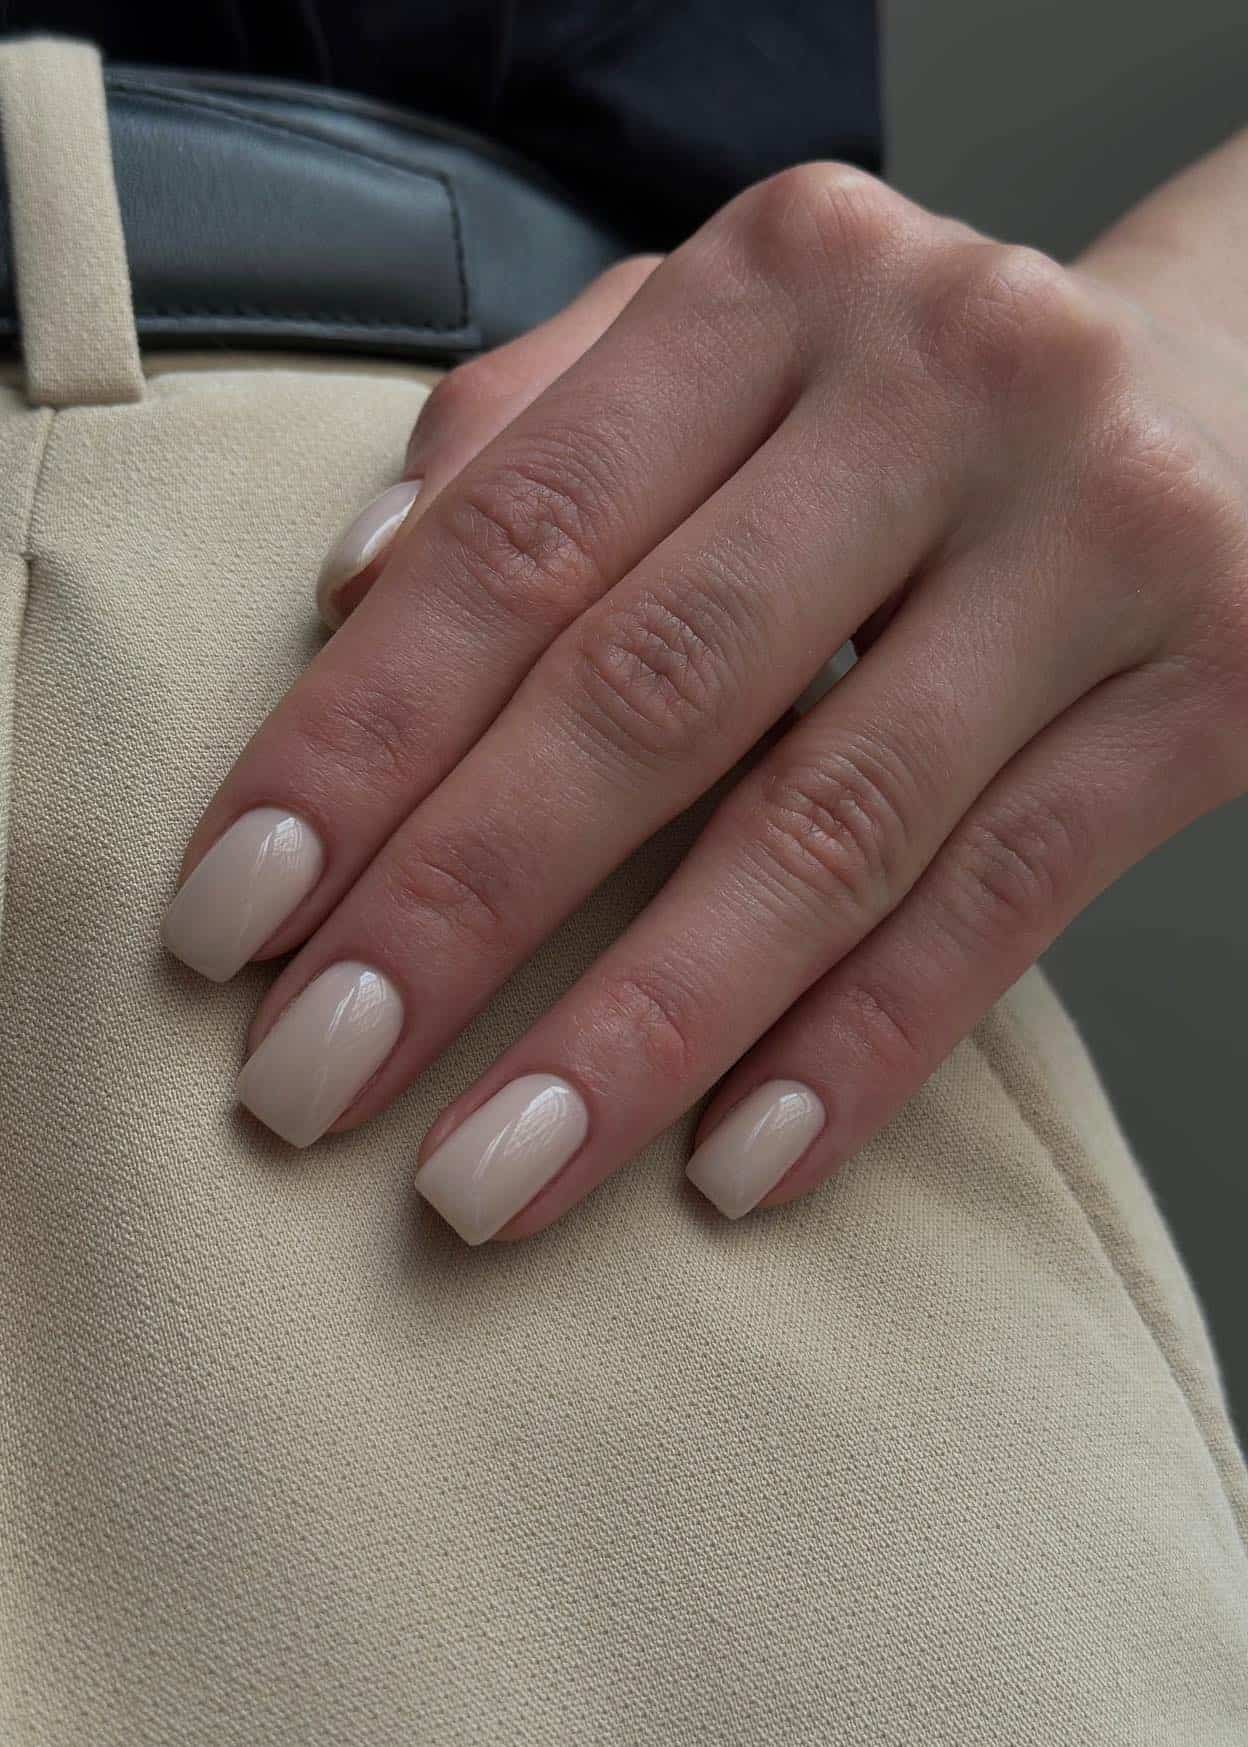 A hand with short square nails painted a glossy soft beige